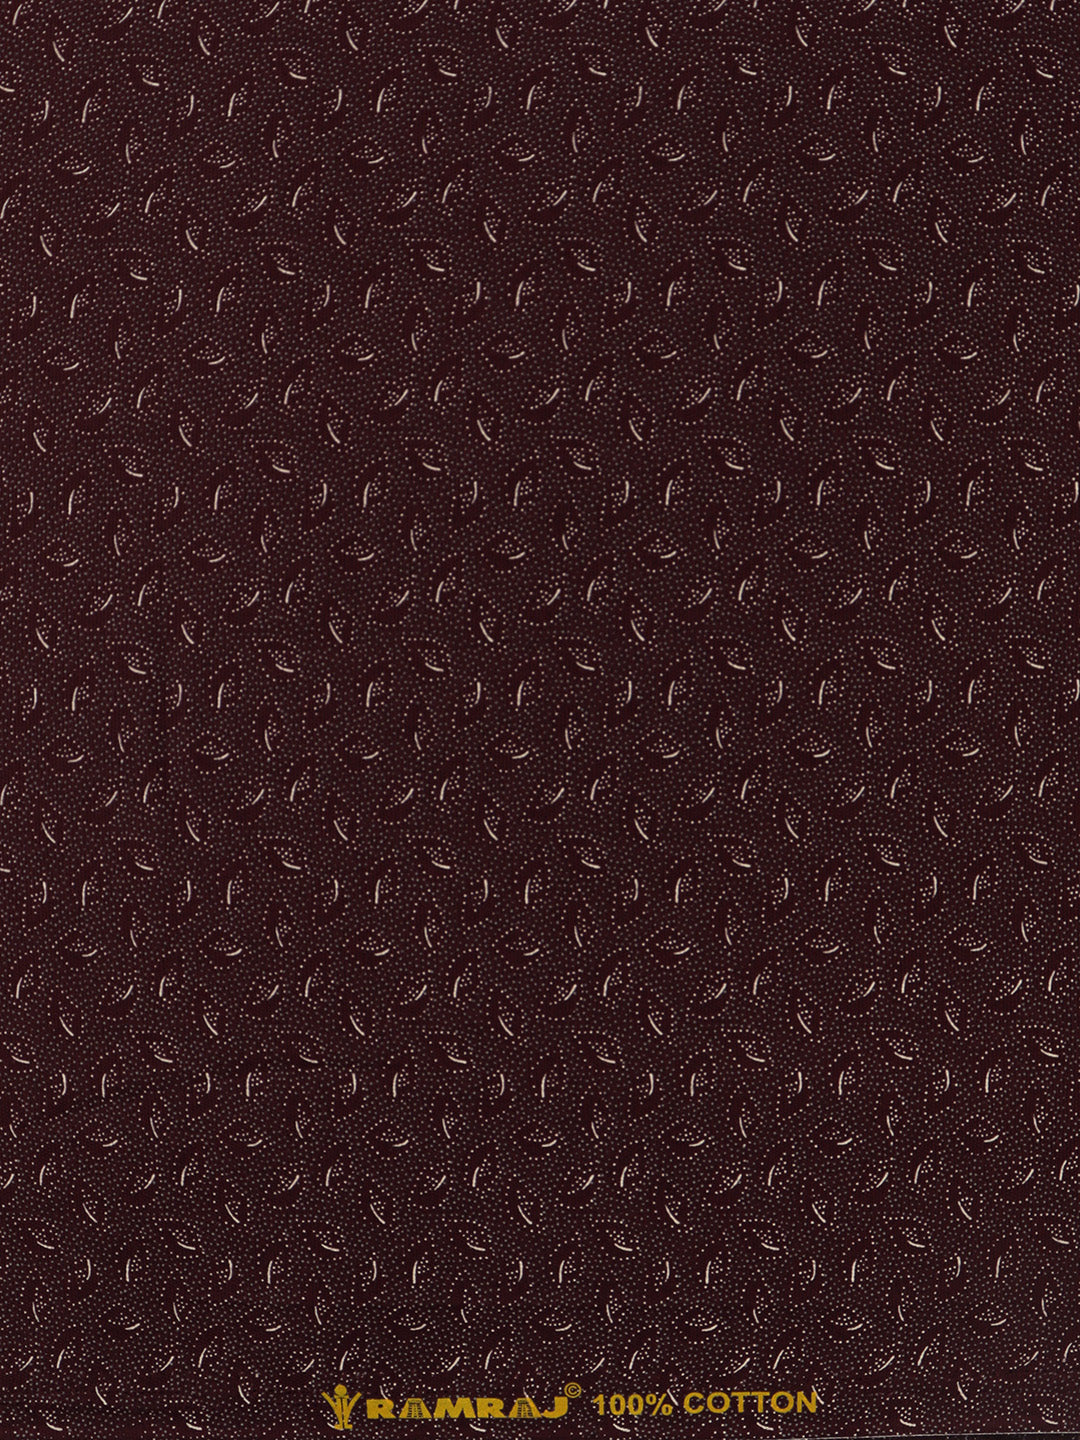 100% Cotton Maroon Over All Printed Shirt Fabric Alpha-Zoom view